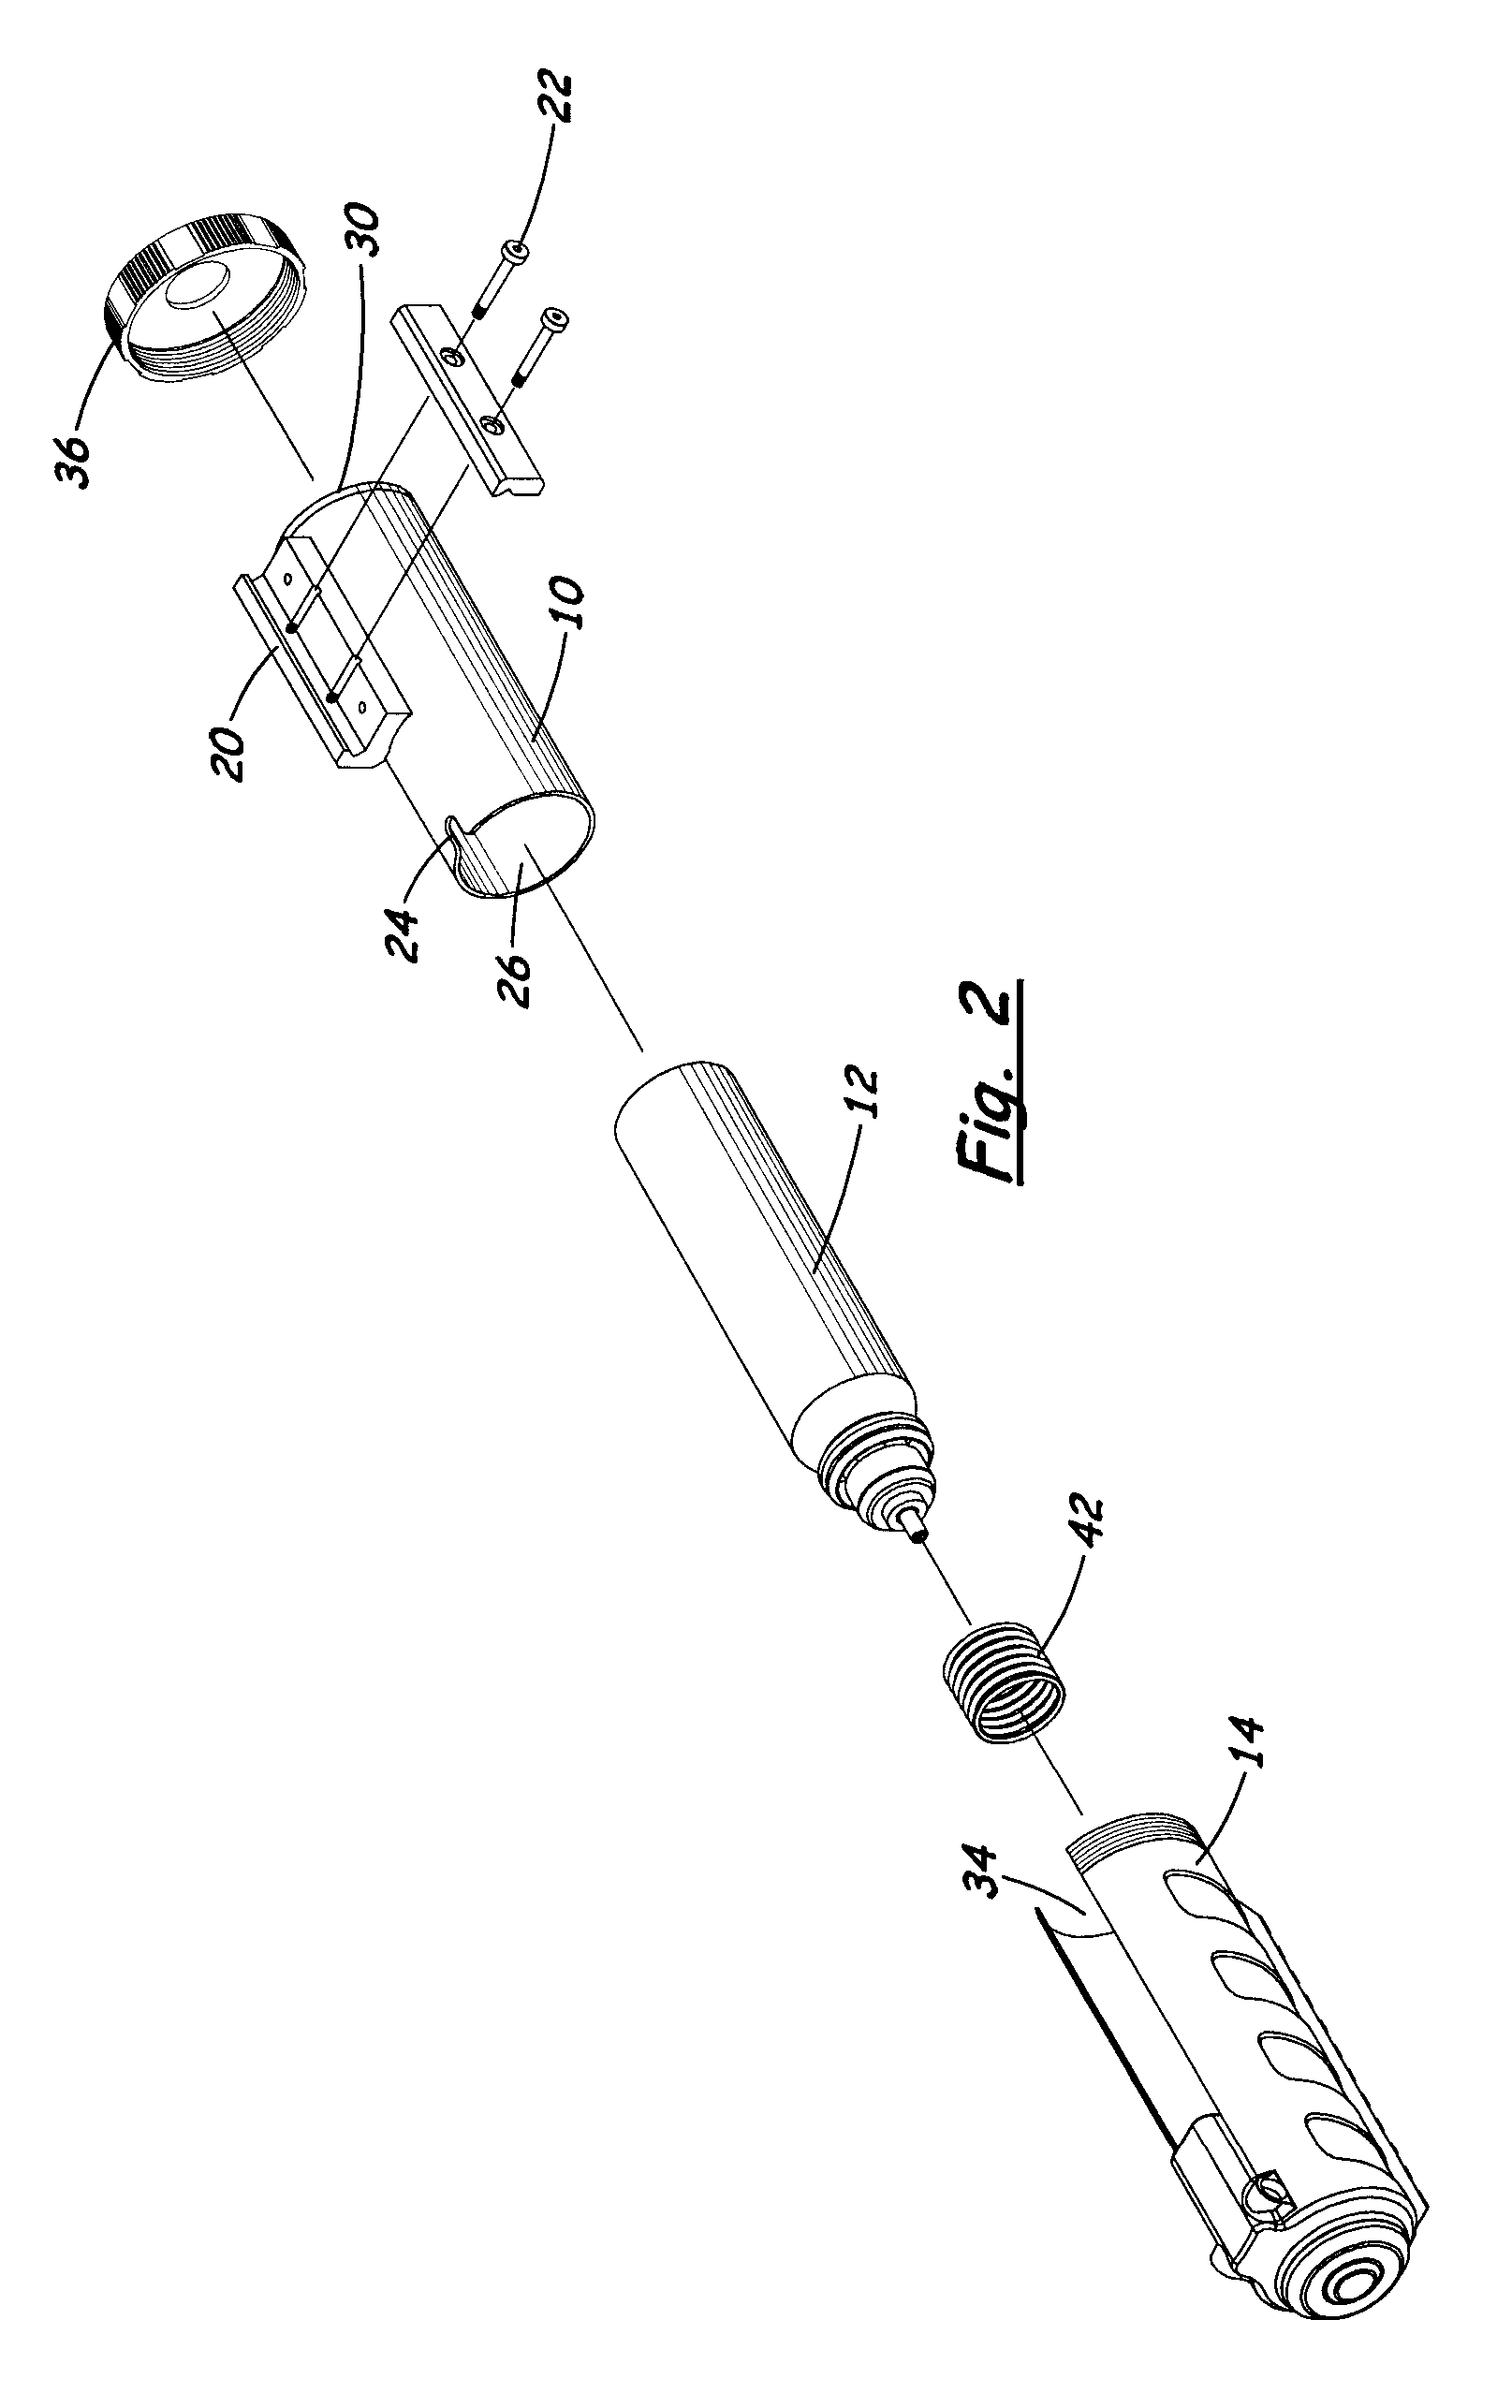 Rifle Mounted Pepper Spray Device with Slide Activation